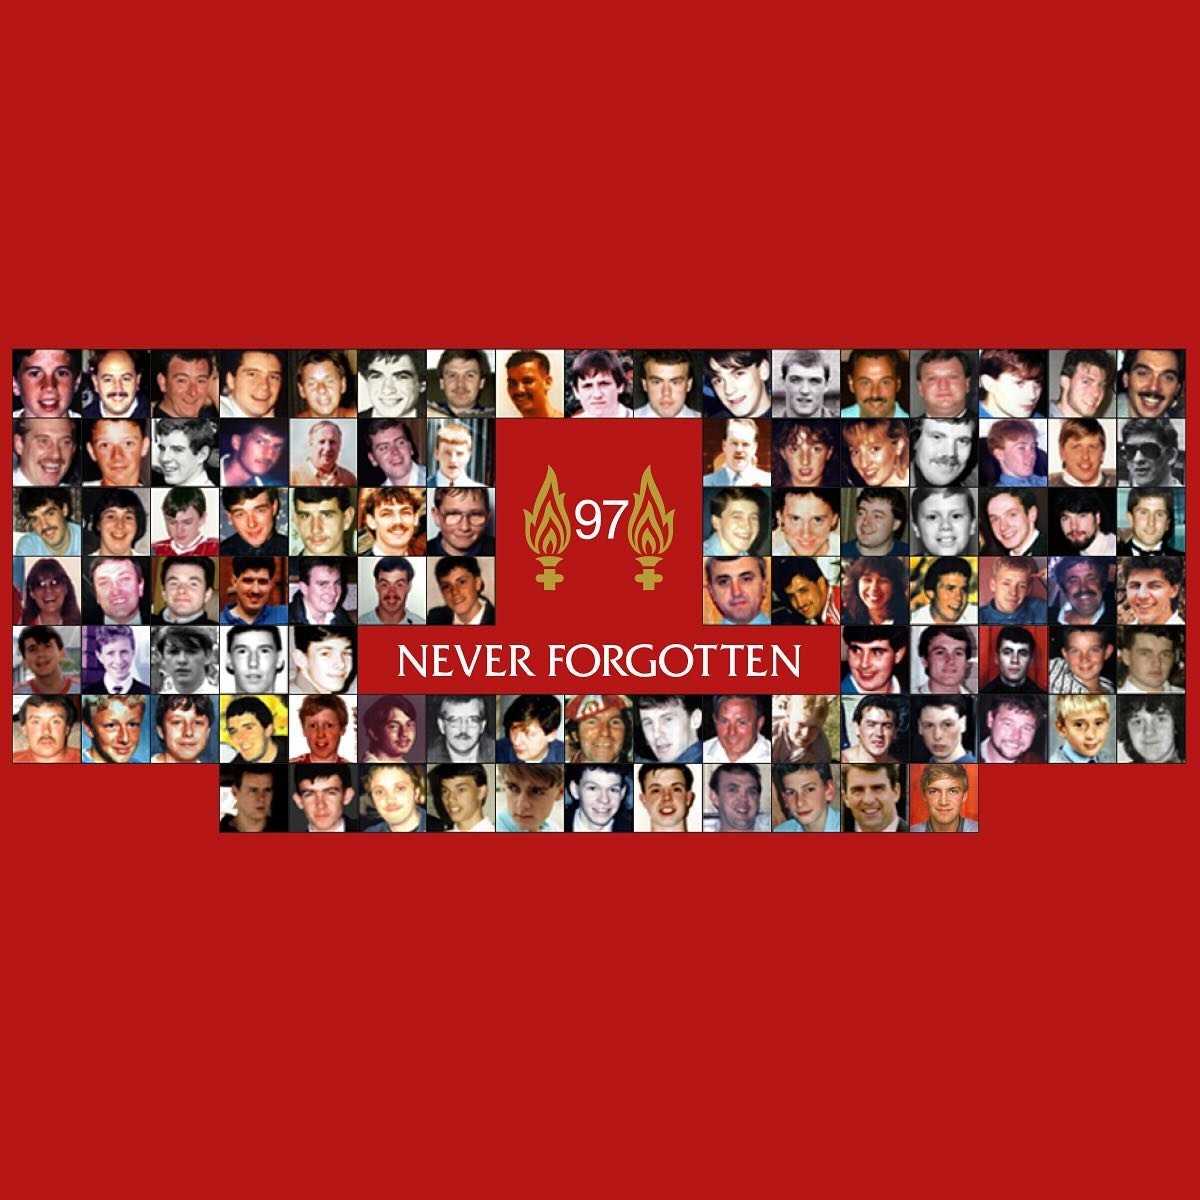 Today on the 35th anniversary of the Hillsborough tragedy we remember the 97 unlawfully killed Liverpool fans. 

We also pay tribute to their families, the survivors and all those affected by the events of that day and commend their long and courageo